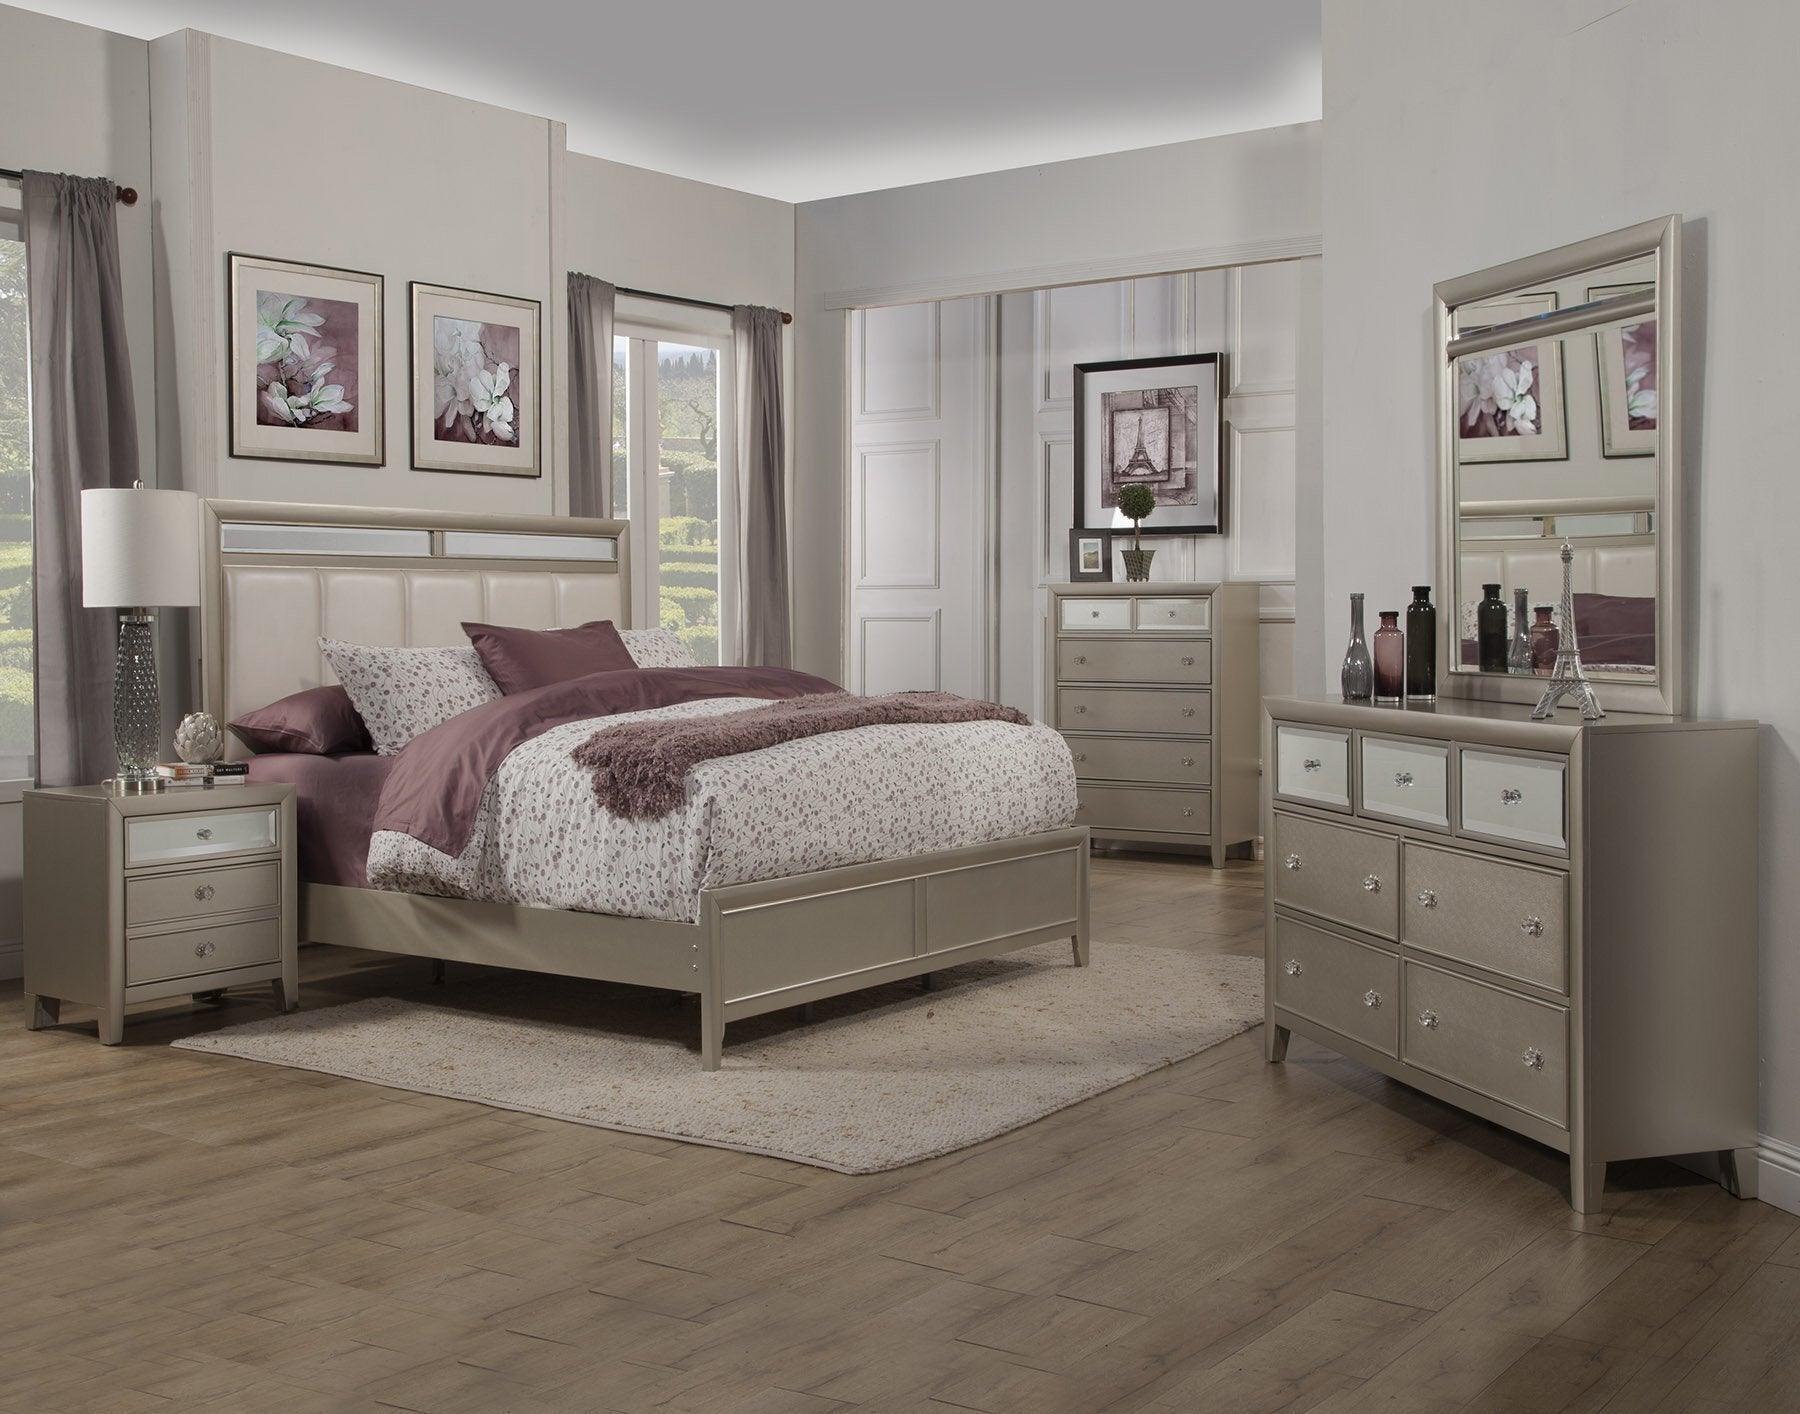 Alpine Furniture Beds - Silver Dreams Queen Panel Bed Silver